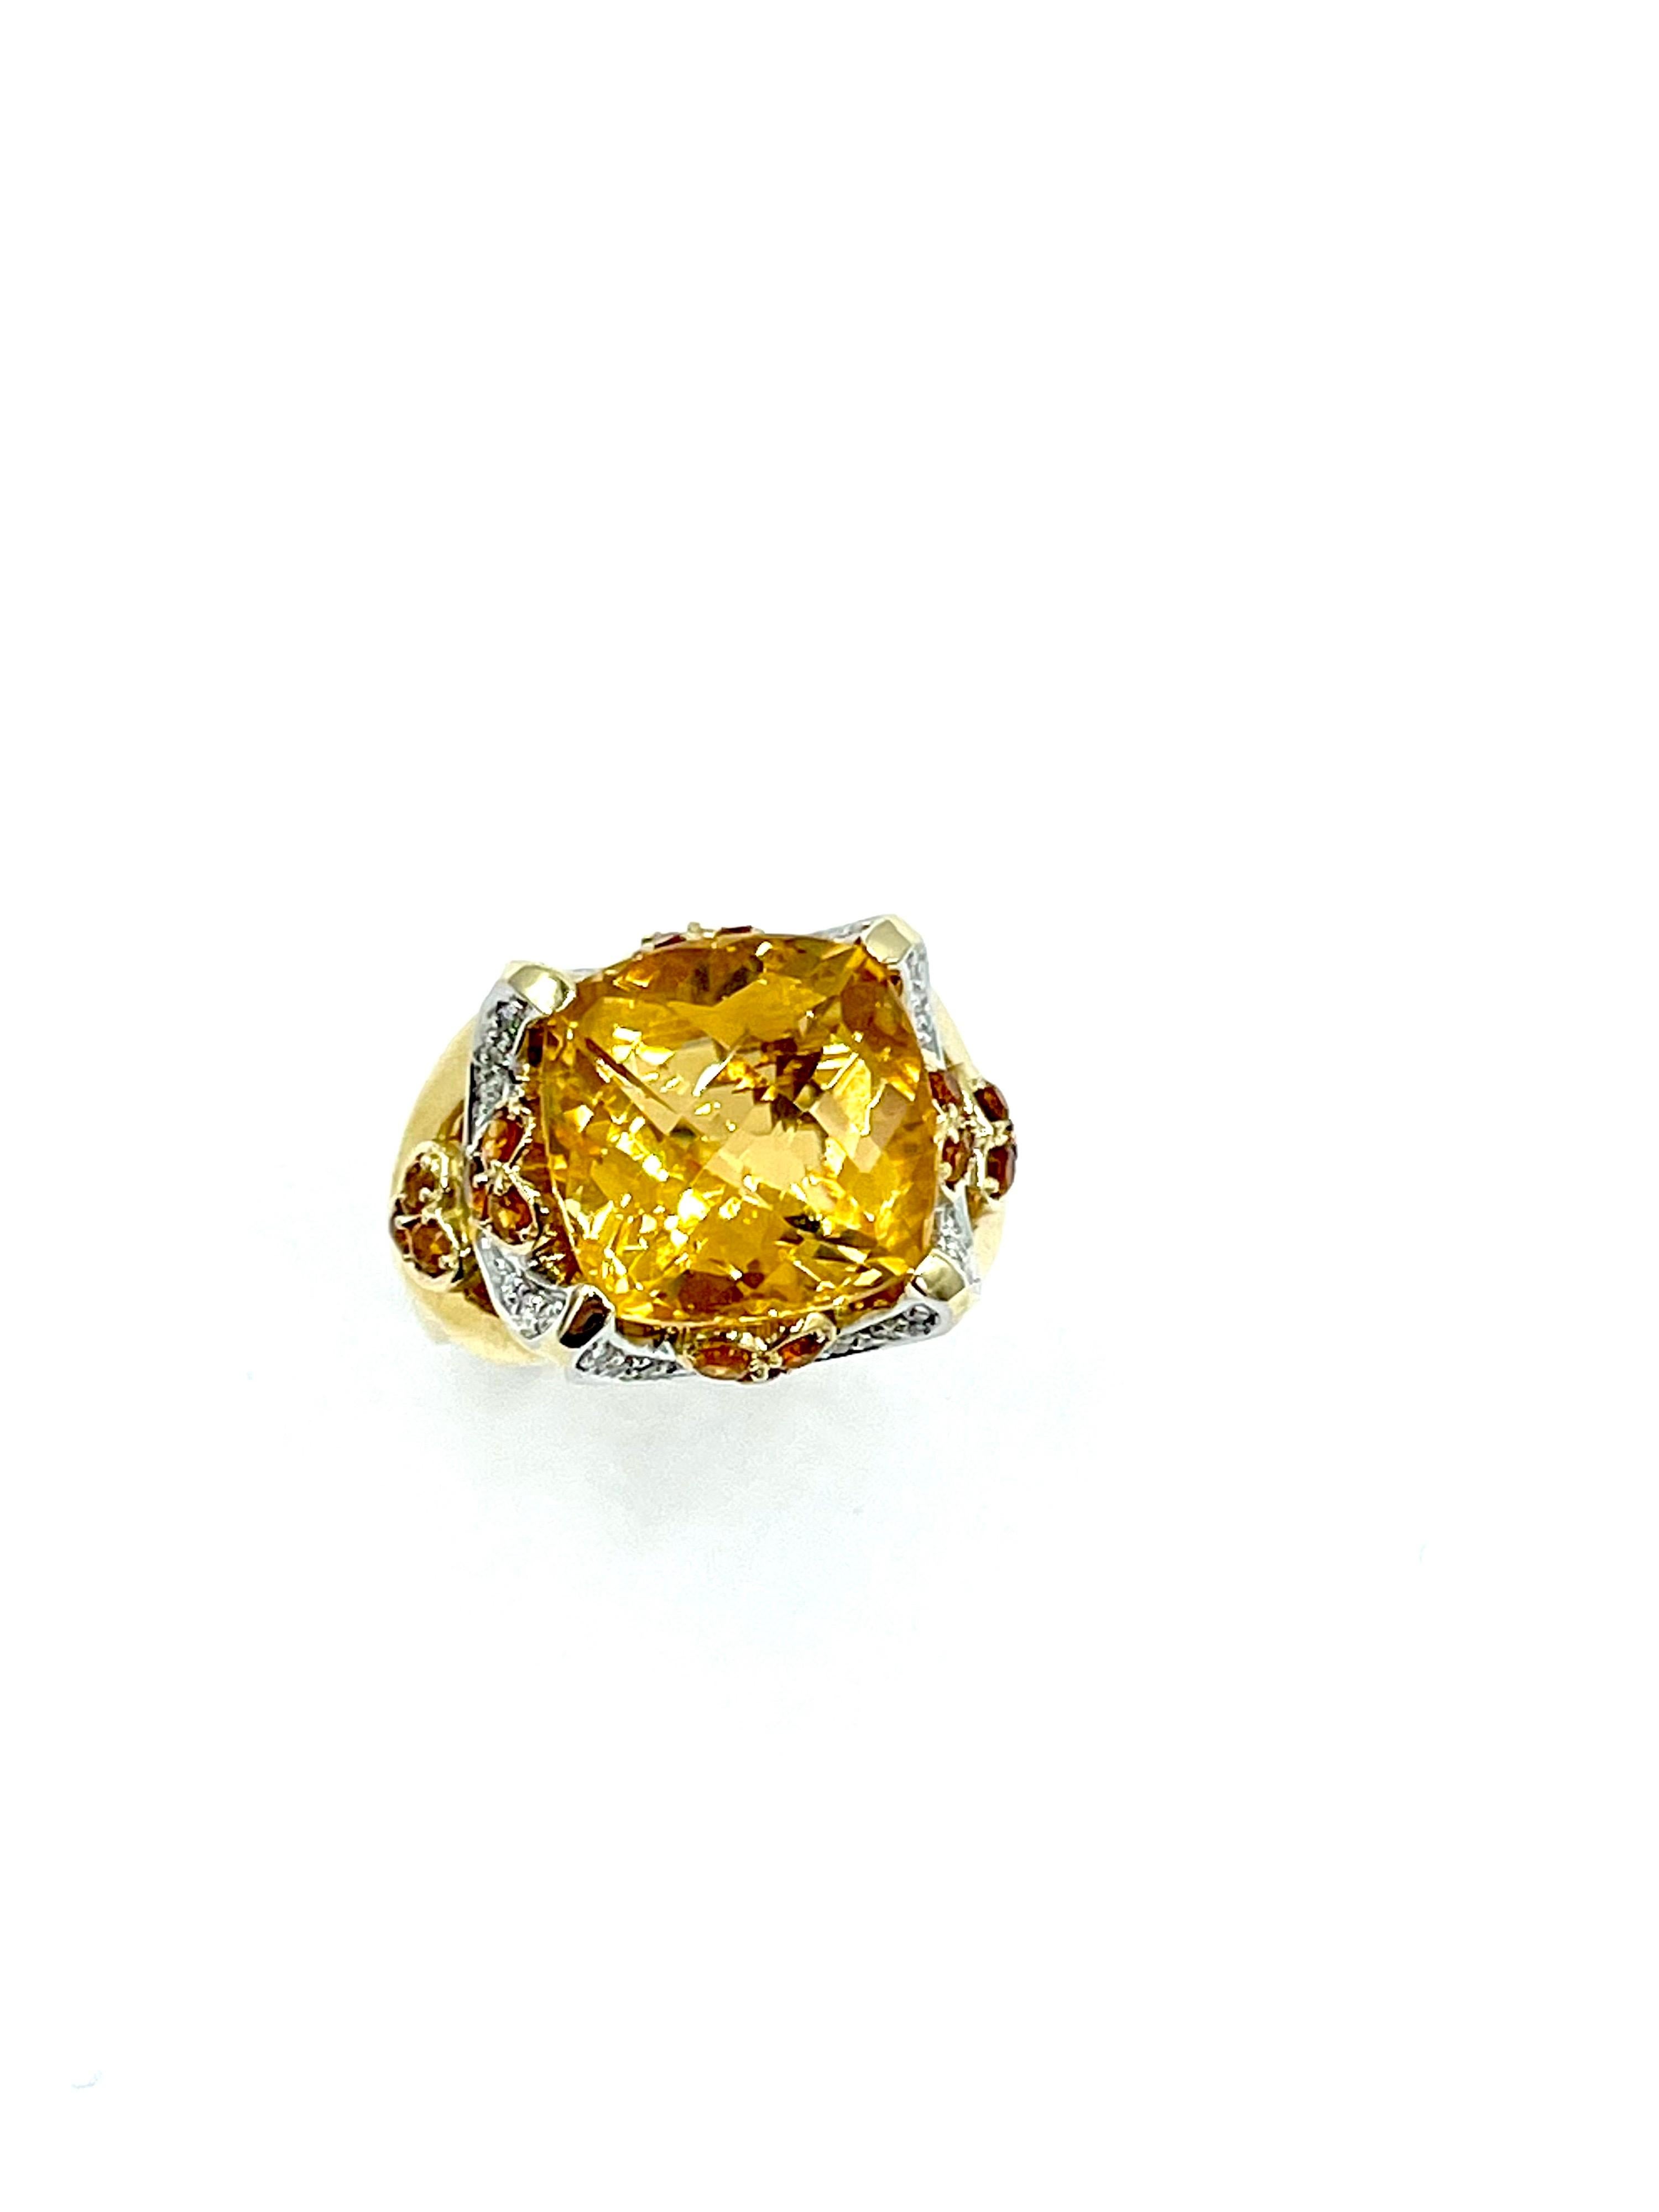 A beautiful and fun fashion ring for all!  The faceted cushion Citrine is 8.07 carats, set in four prongs with a single row of diamonds extending to the prongs on each side.  There is also small clusters of three round cut citrines set on all four